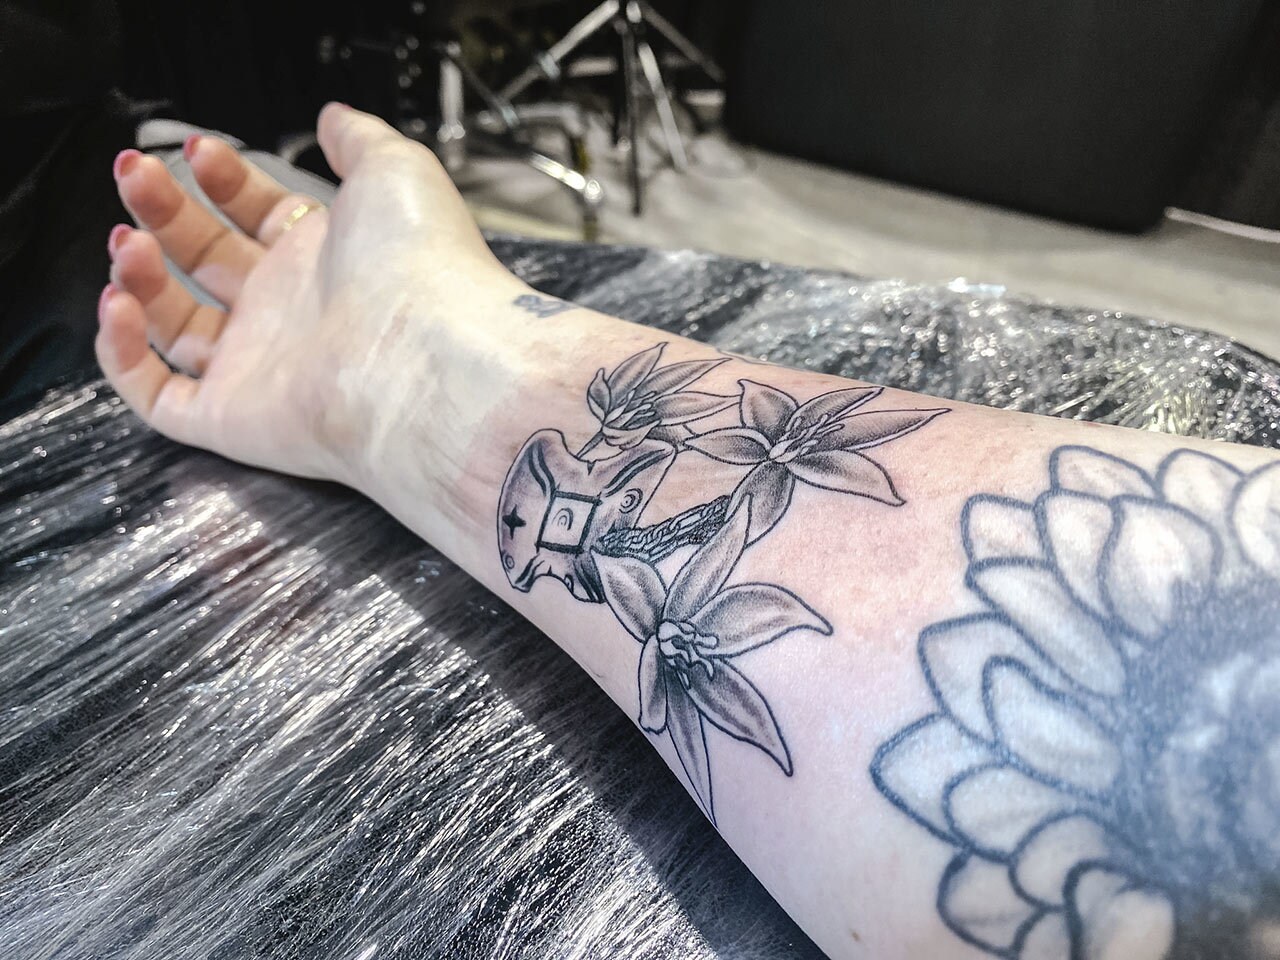 Japor snippet tattoo by Mike Bianco